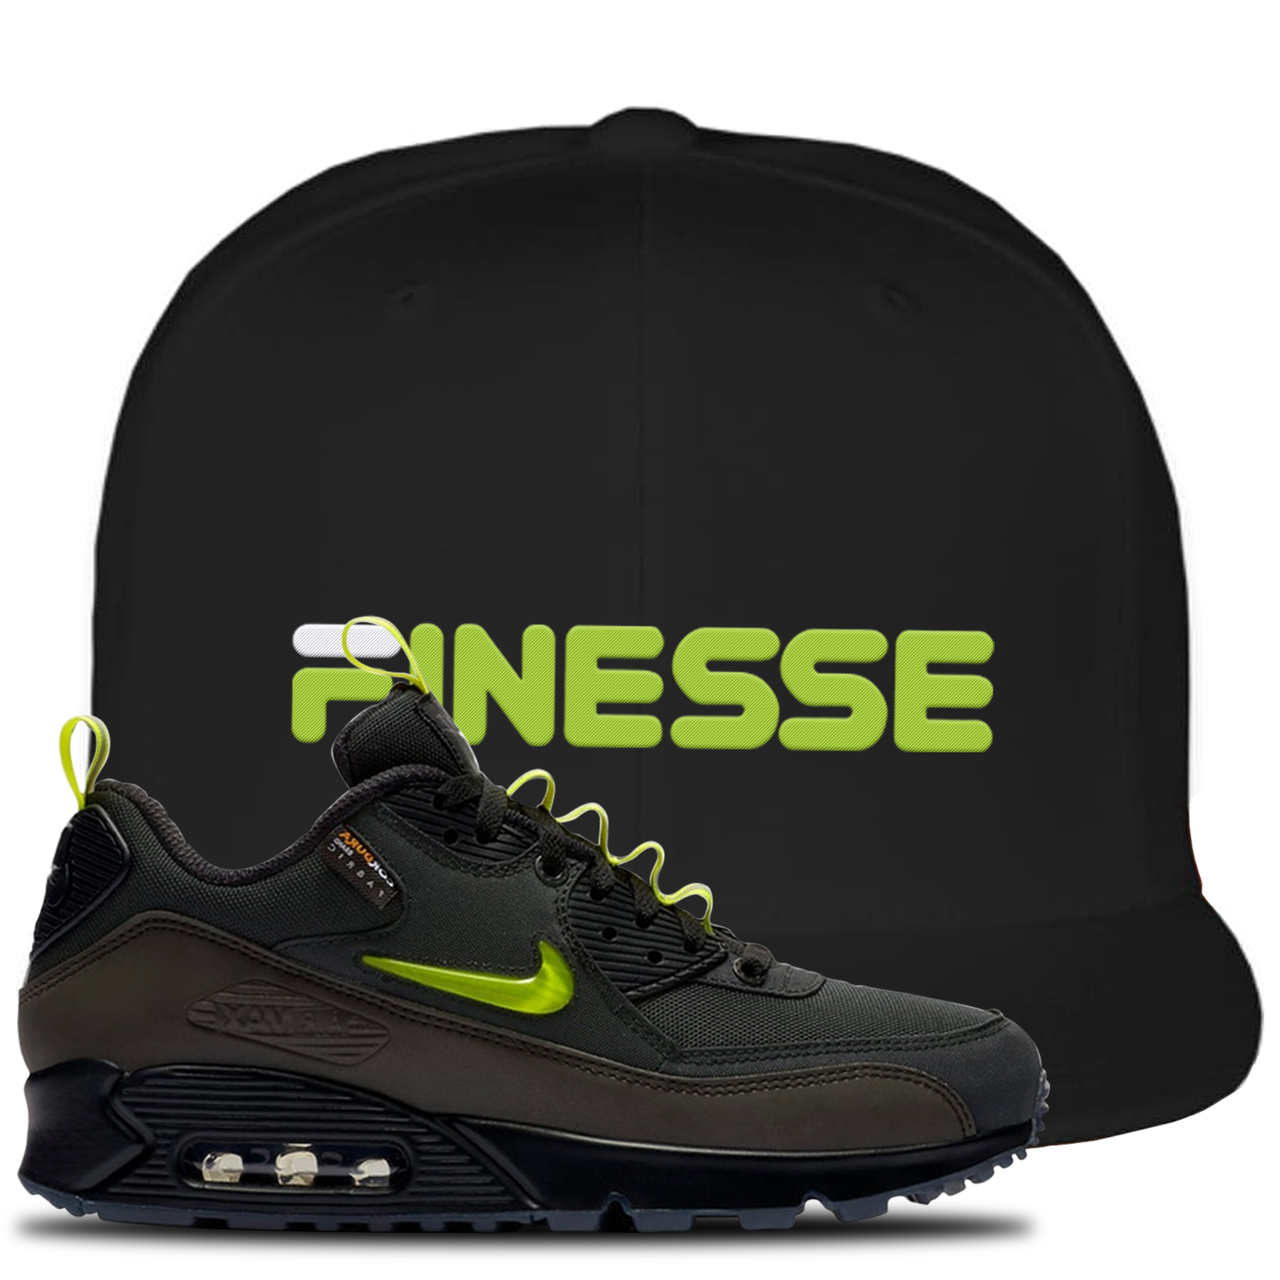 The Basement X Air Max 90 Manchester Finesse Black Sneaker Hook Up Snapback Hat